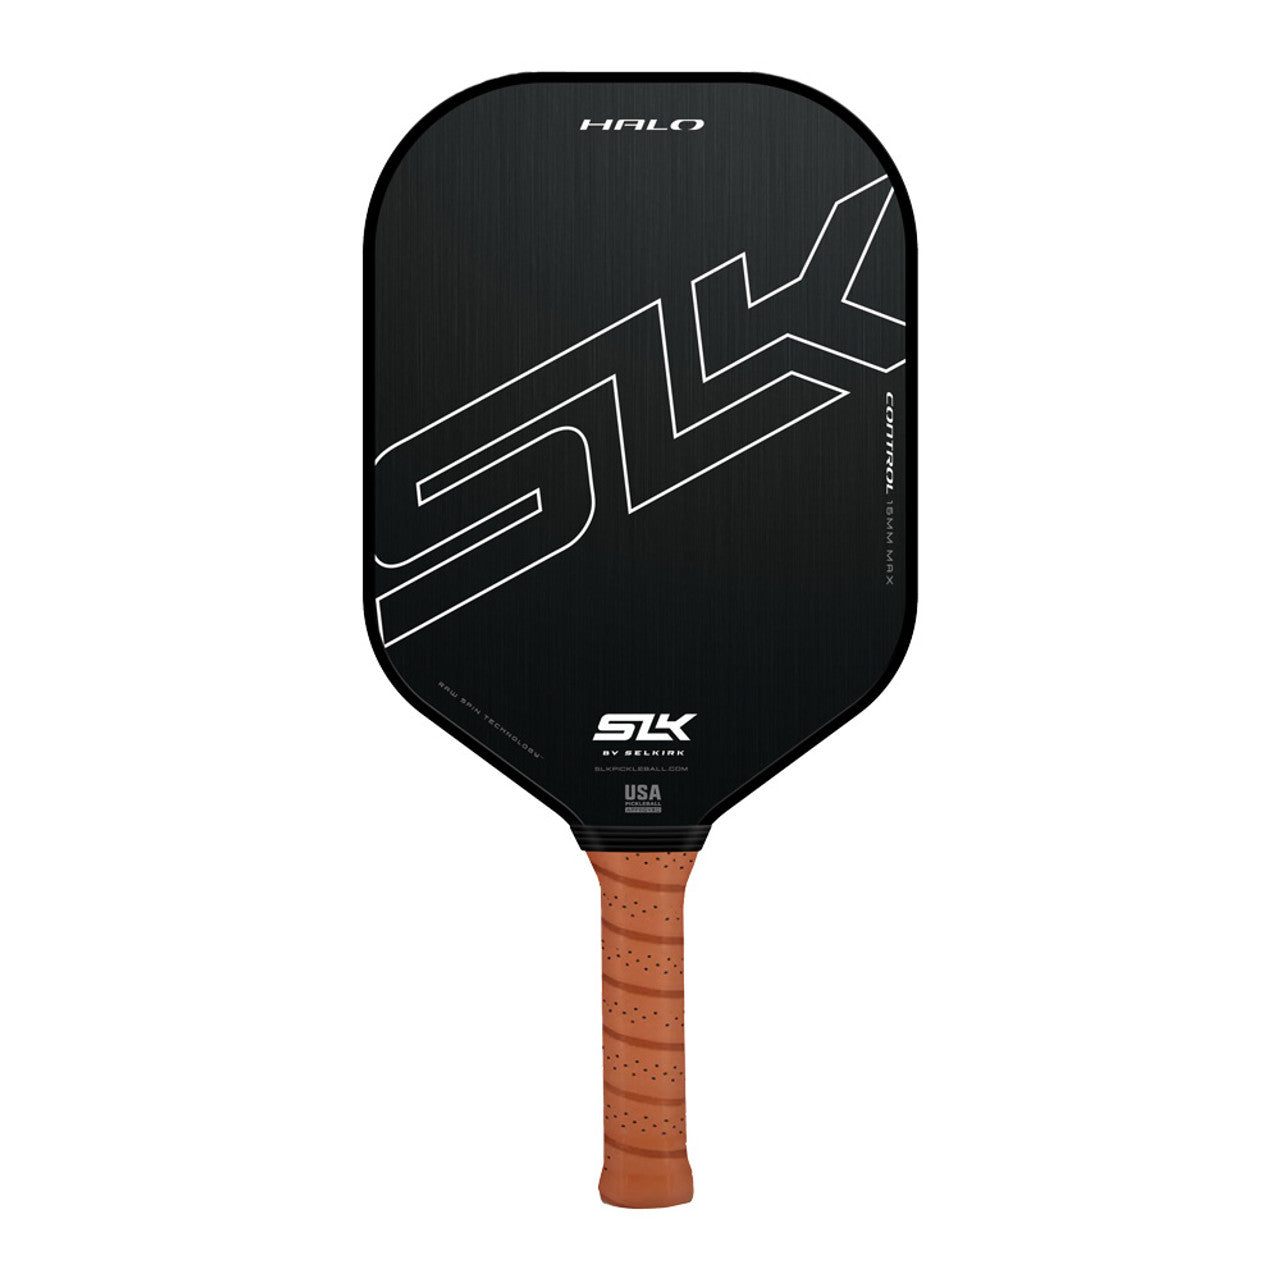 A Selkirk SLK Halo XL Pickleball Paddle on a white background.